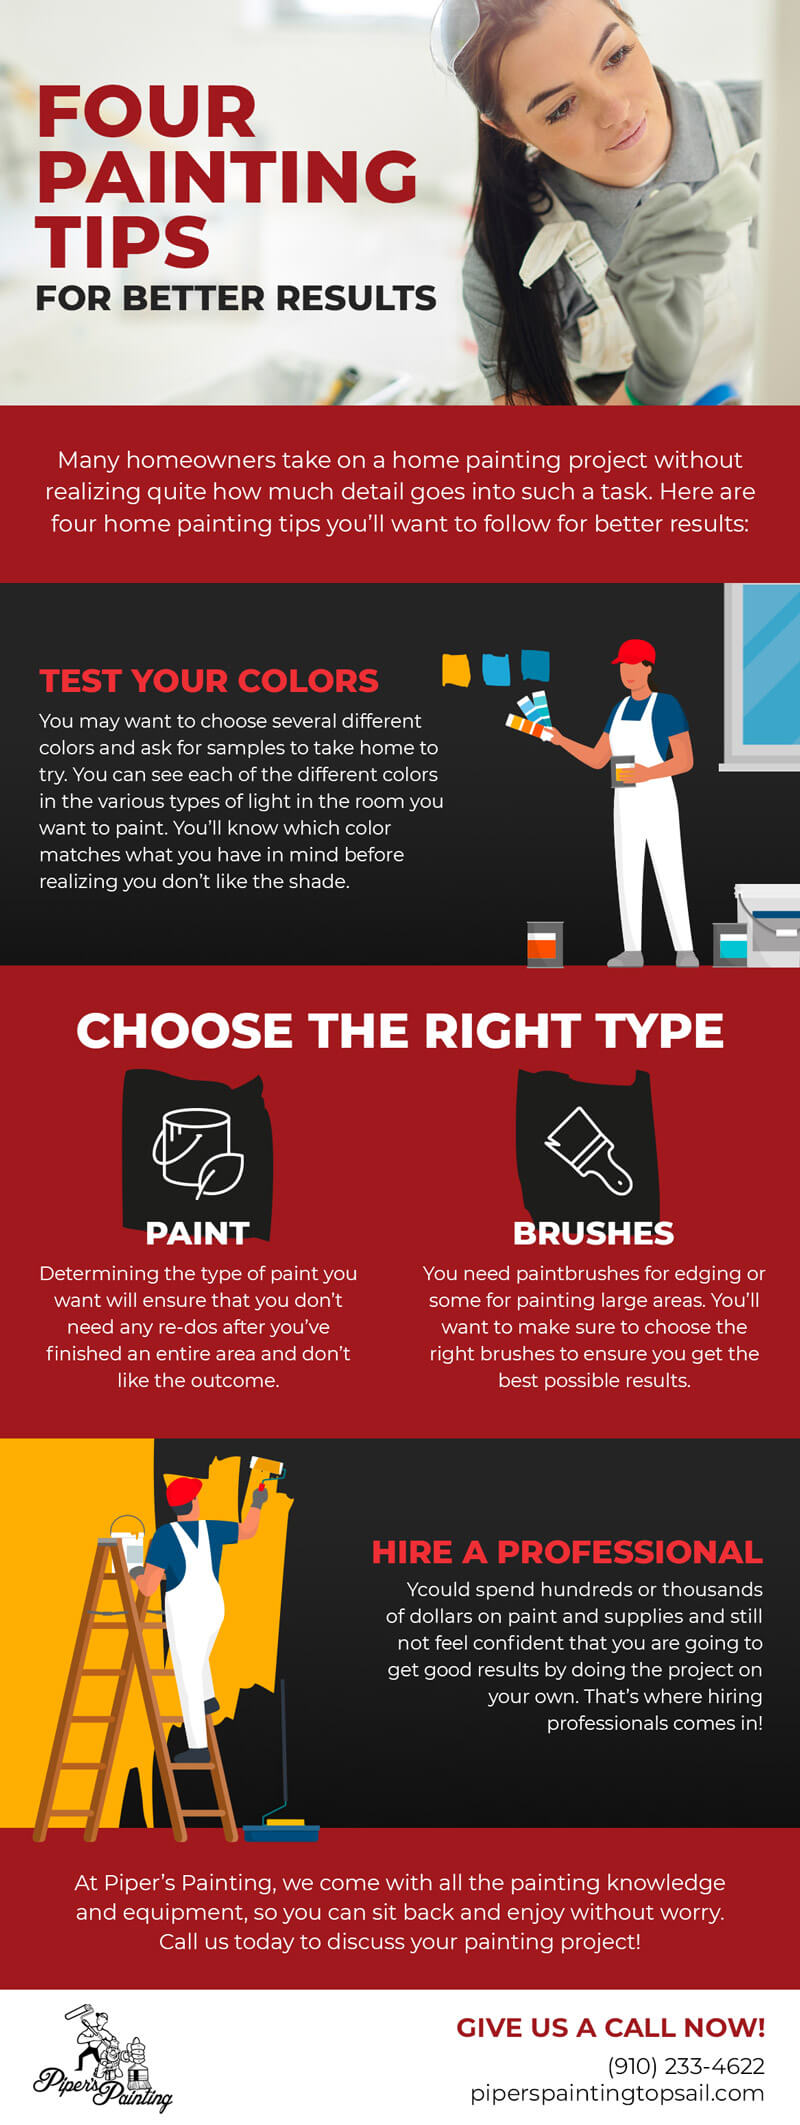 Four Home Painting Tips for Better Results 